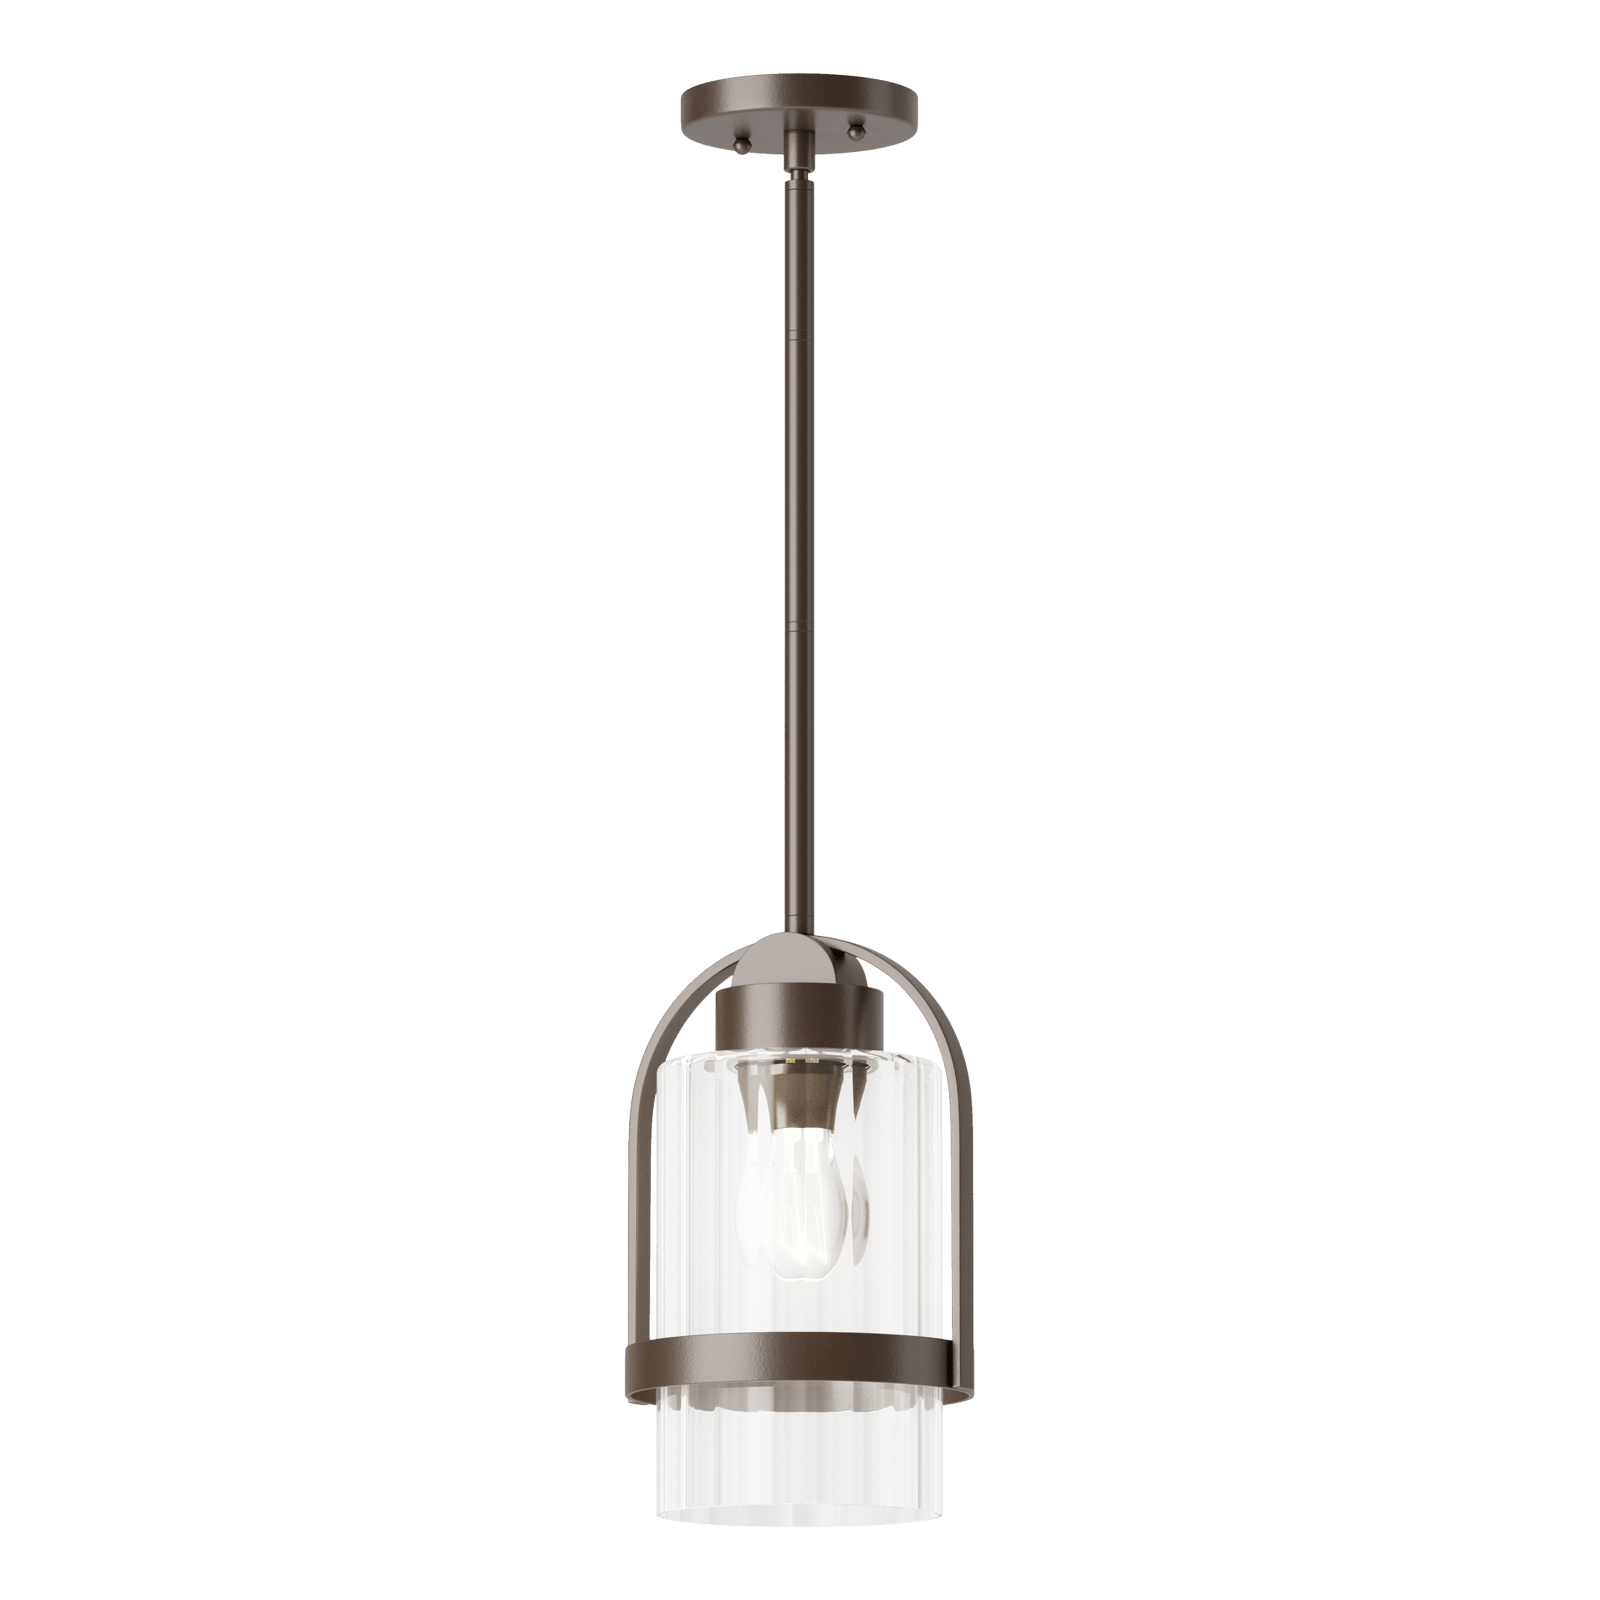 Hubbardton Forge Alcove Outdoor Pendant Outdoor Light Fixture l Hanging Hubbardton Forge Coastal Bronze Clear Glass (ZM) 